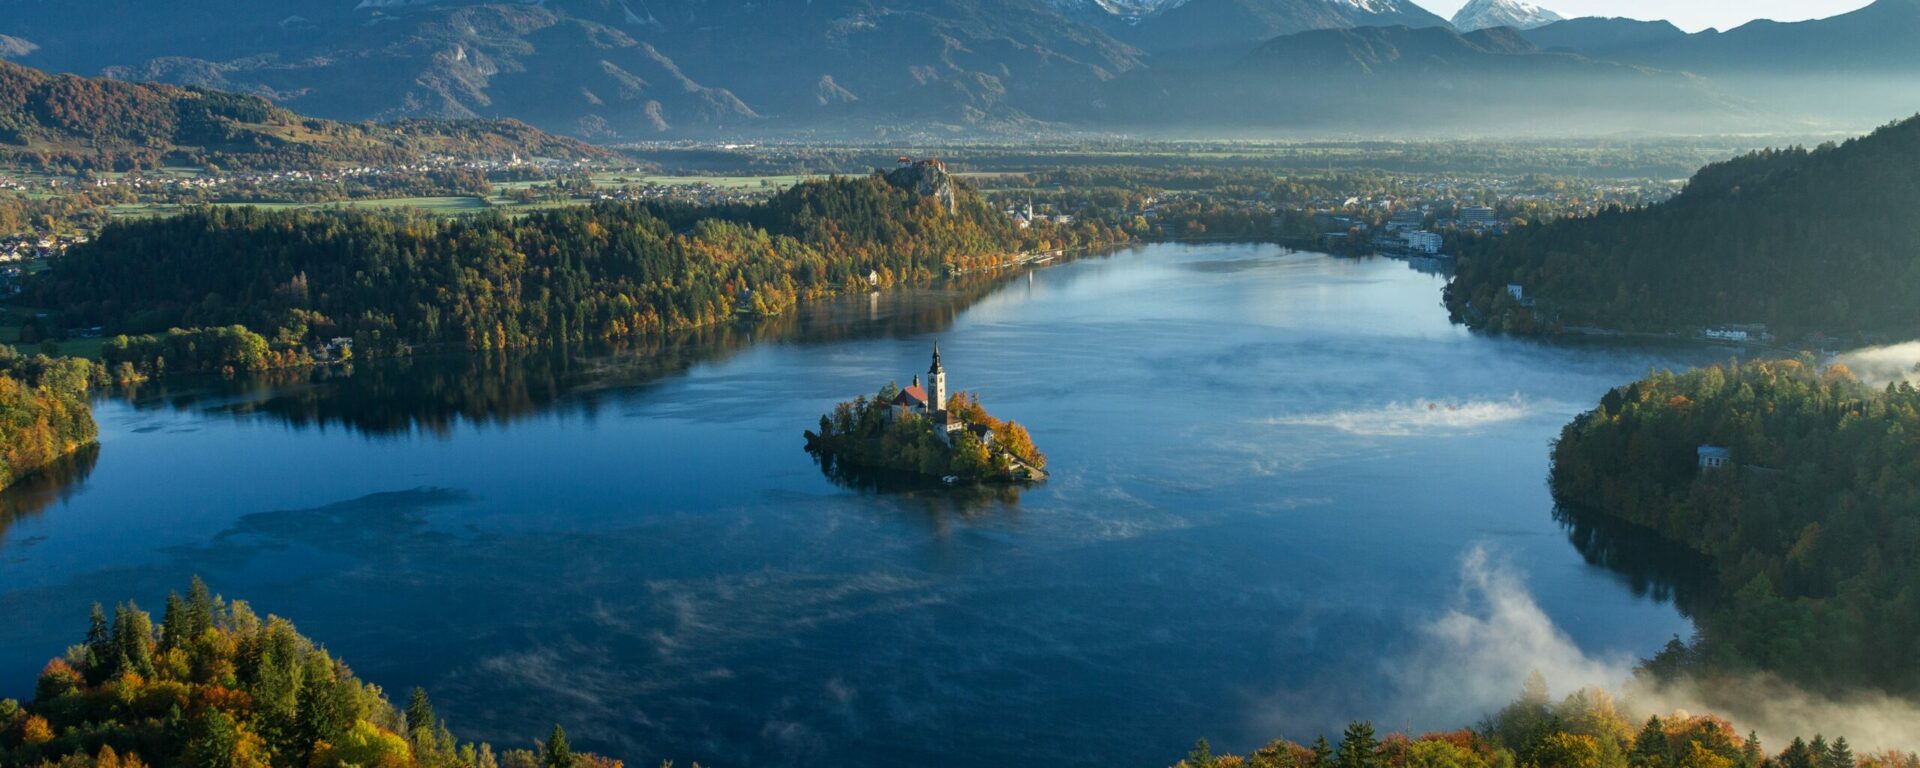 A view of Lake Bled